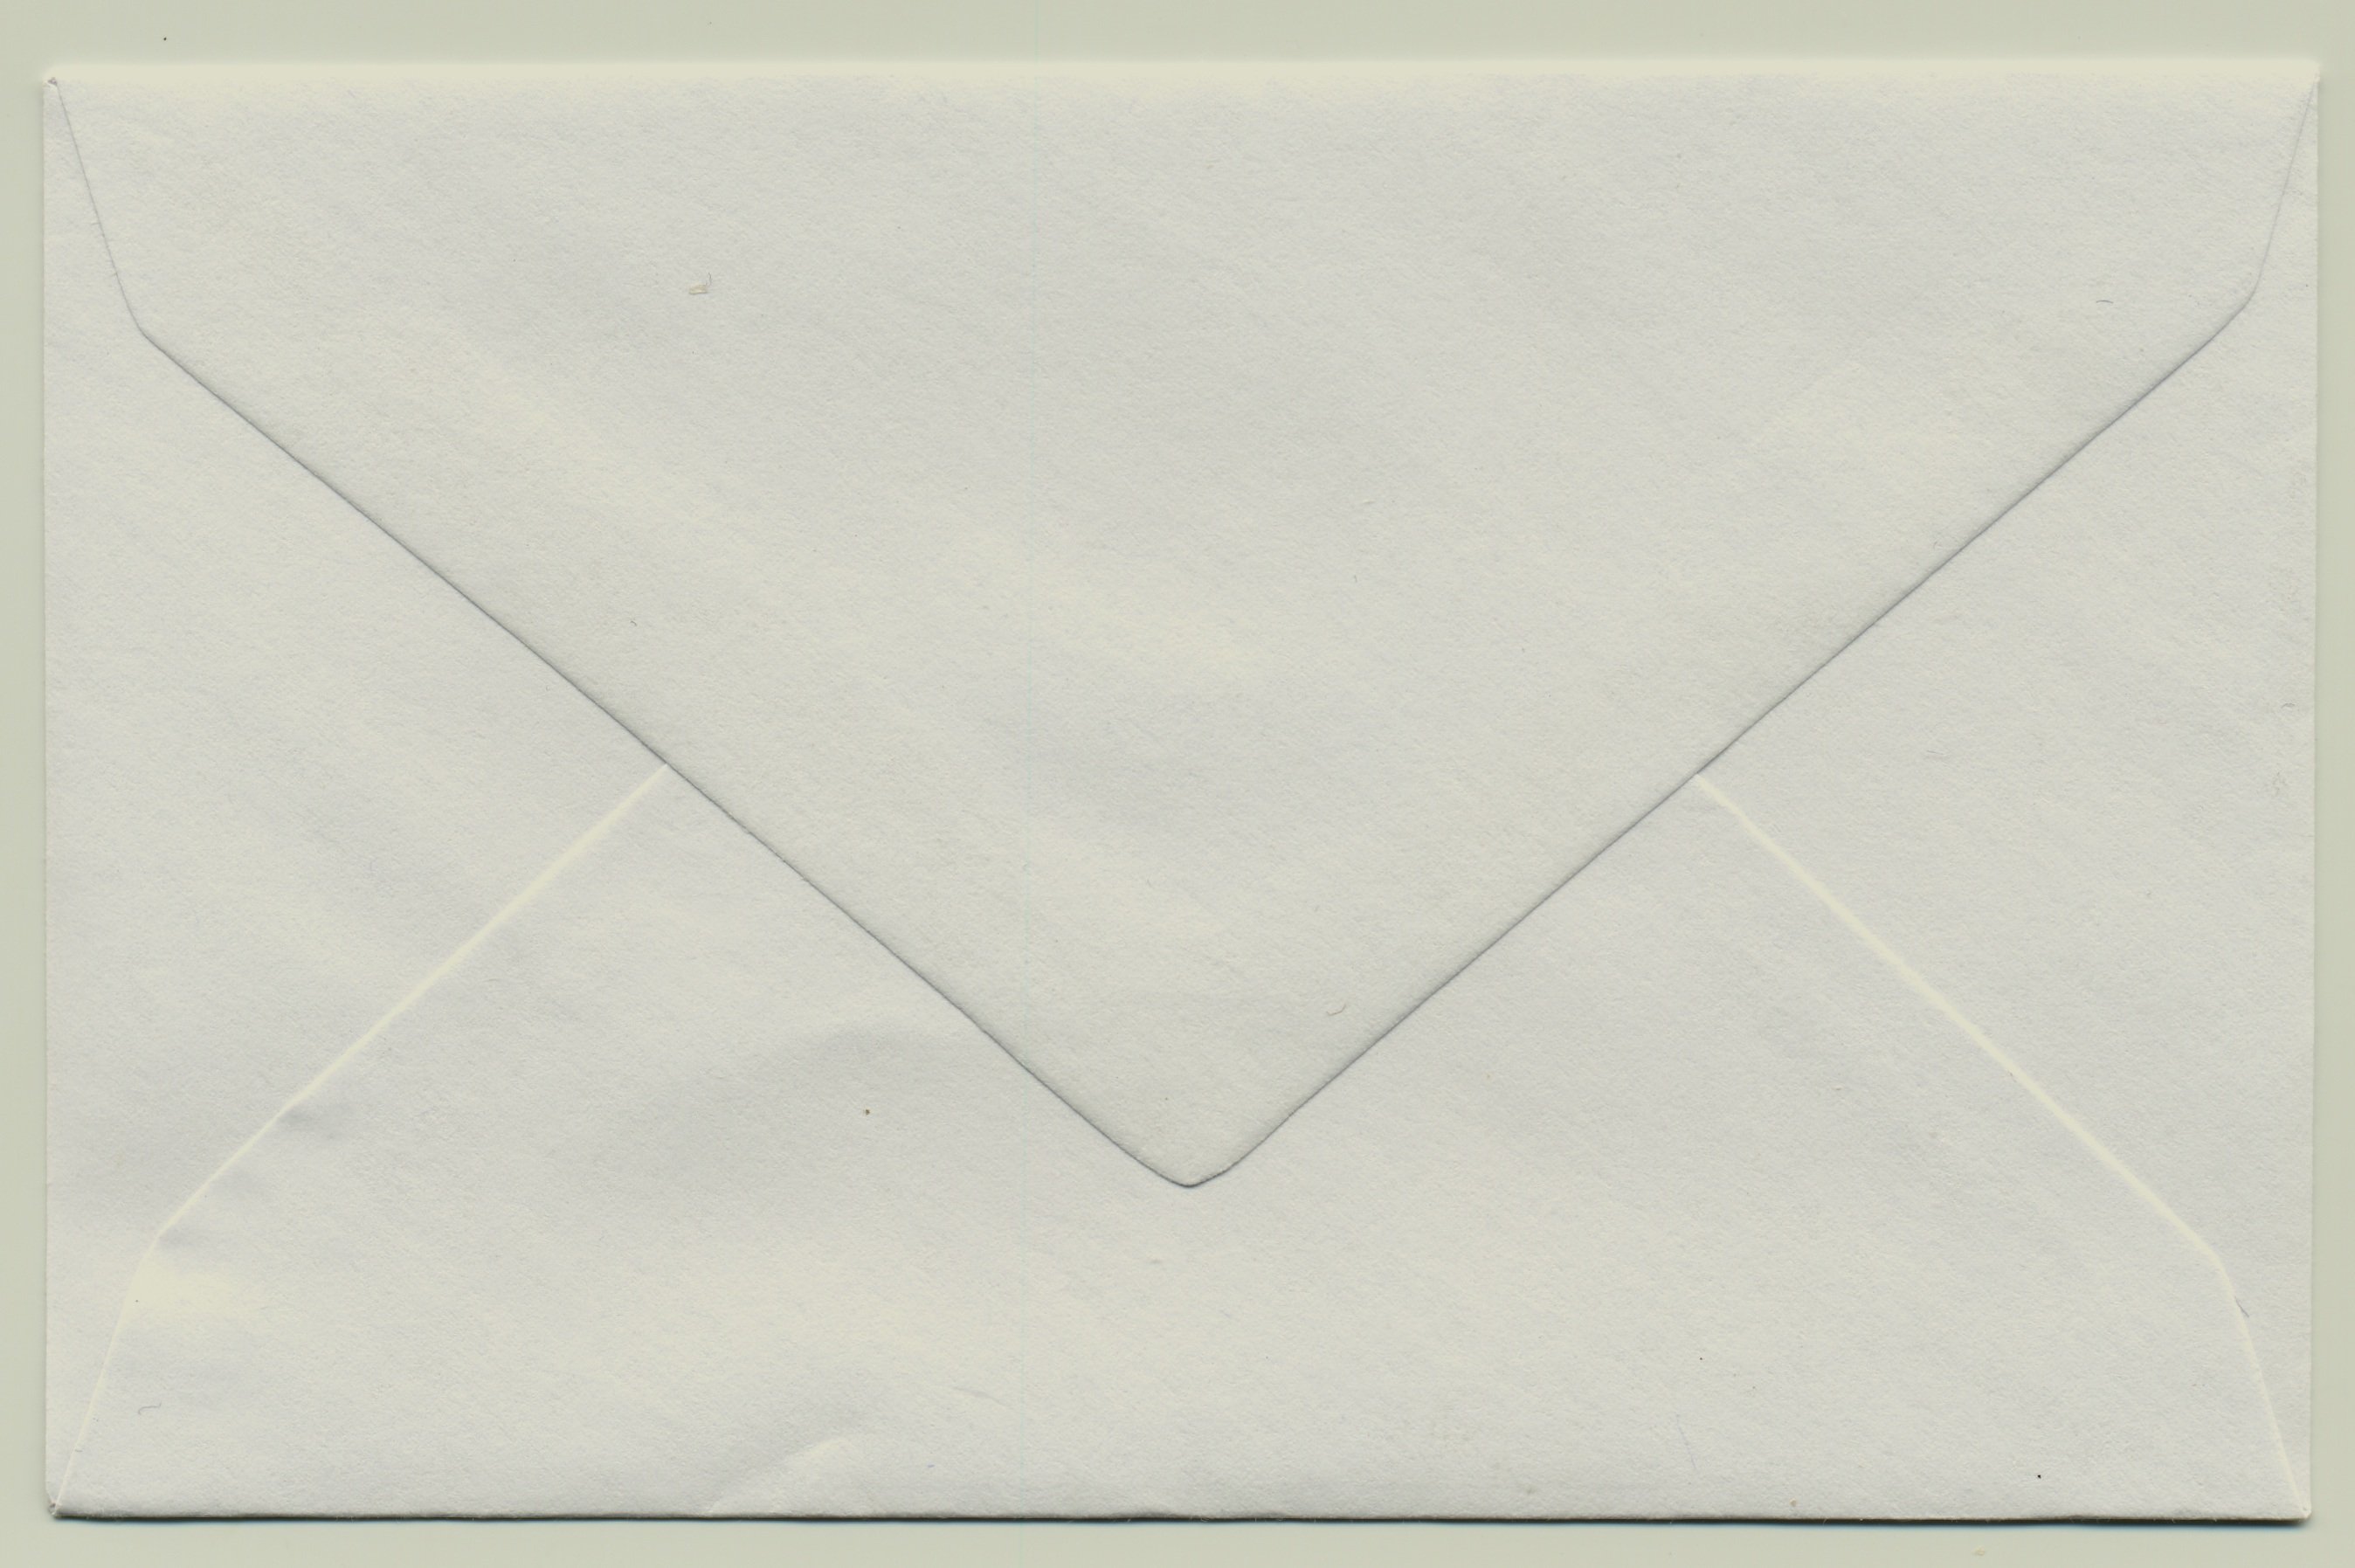 How To Open A Sealed Envelope Without Damaging It